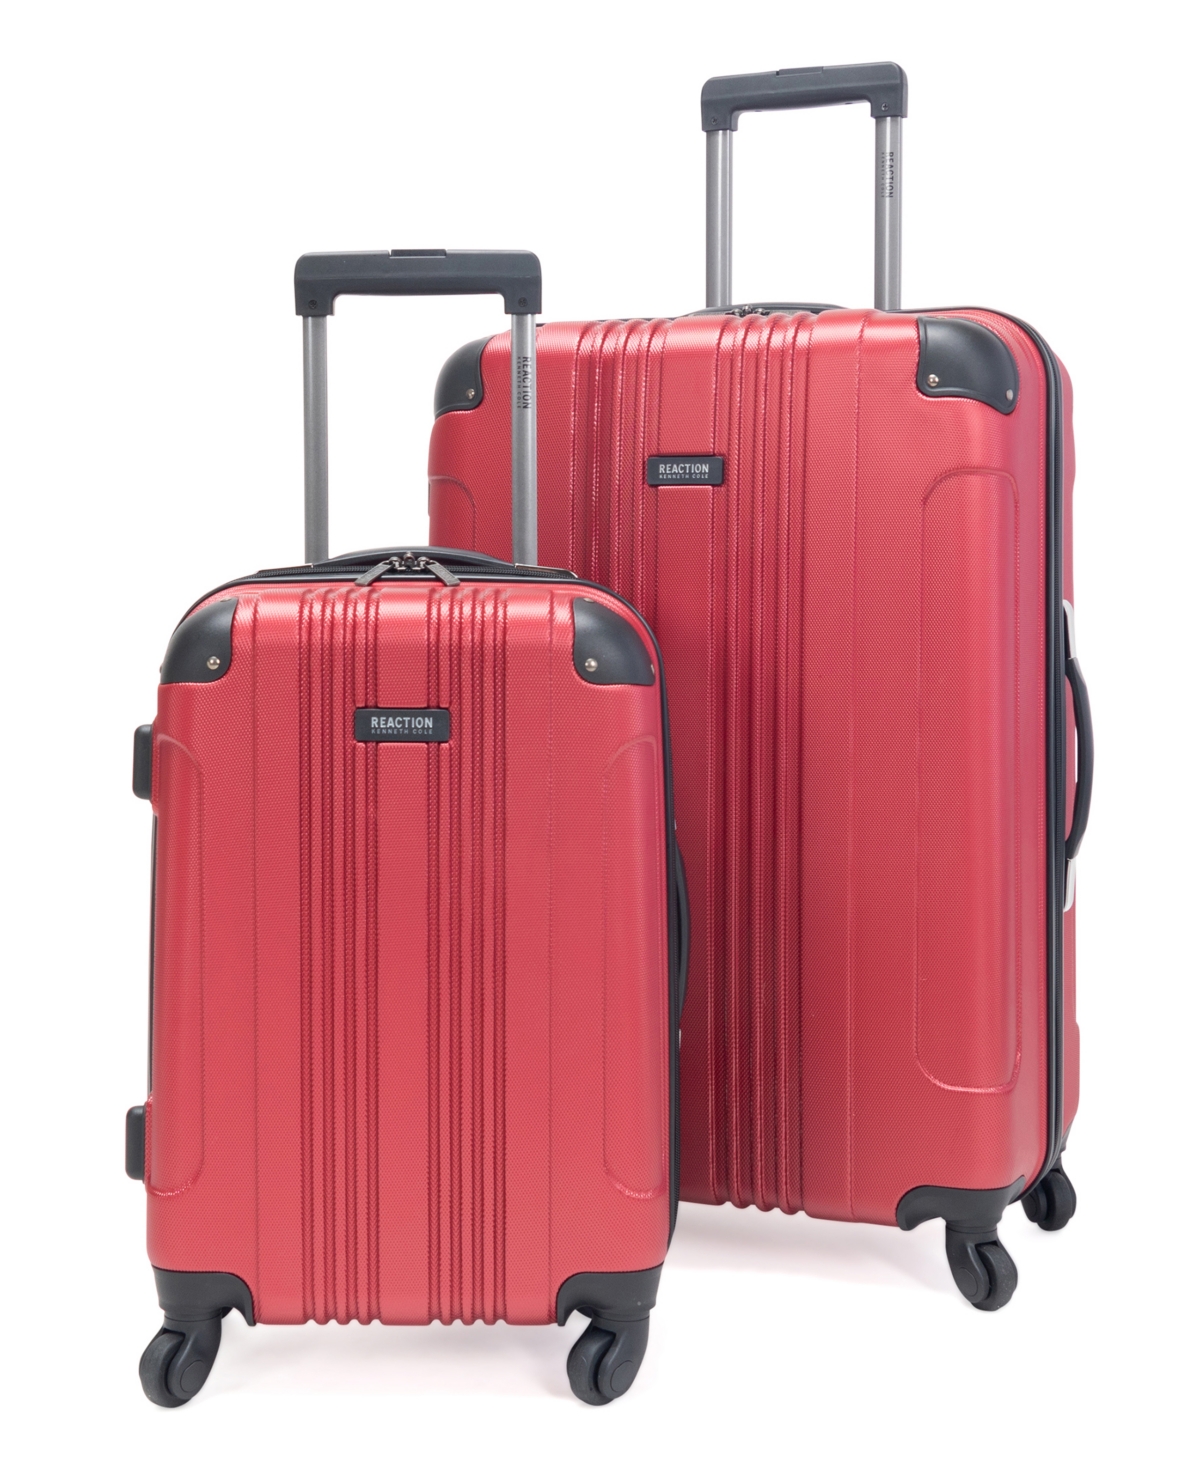 Out of Bounds 2-pc Lightweight Hardside Spinner Luggage Set - Scarlet Red